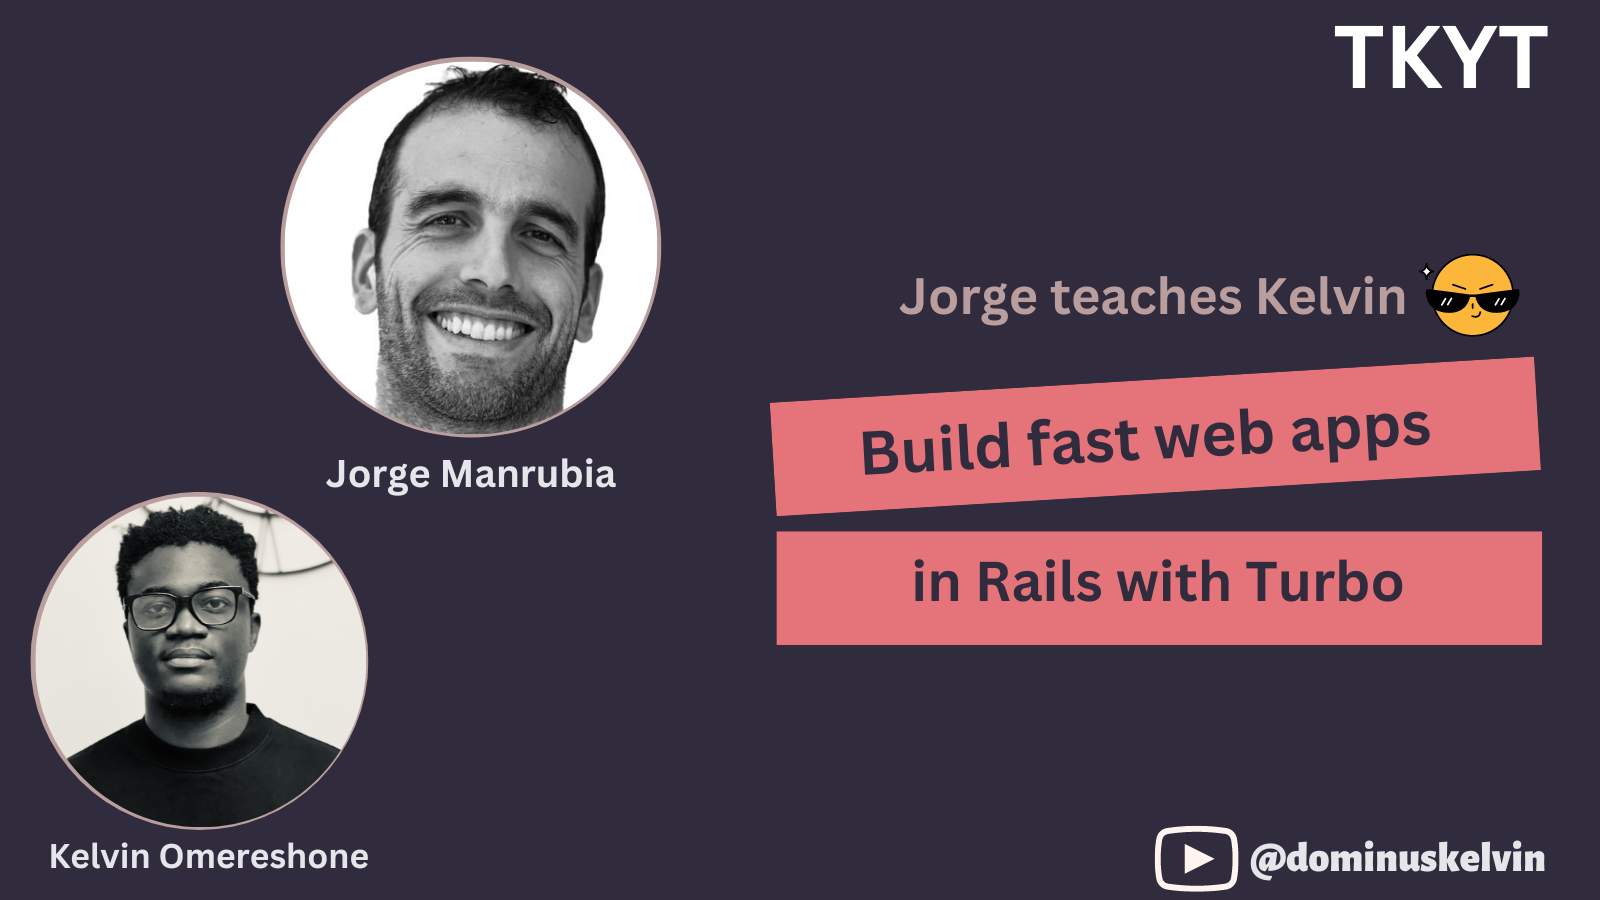 Build fast web apps in Rails with Turbo